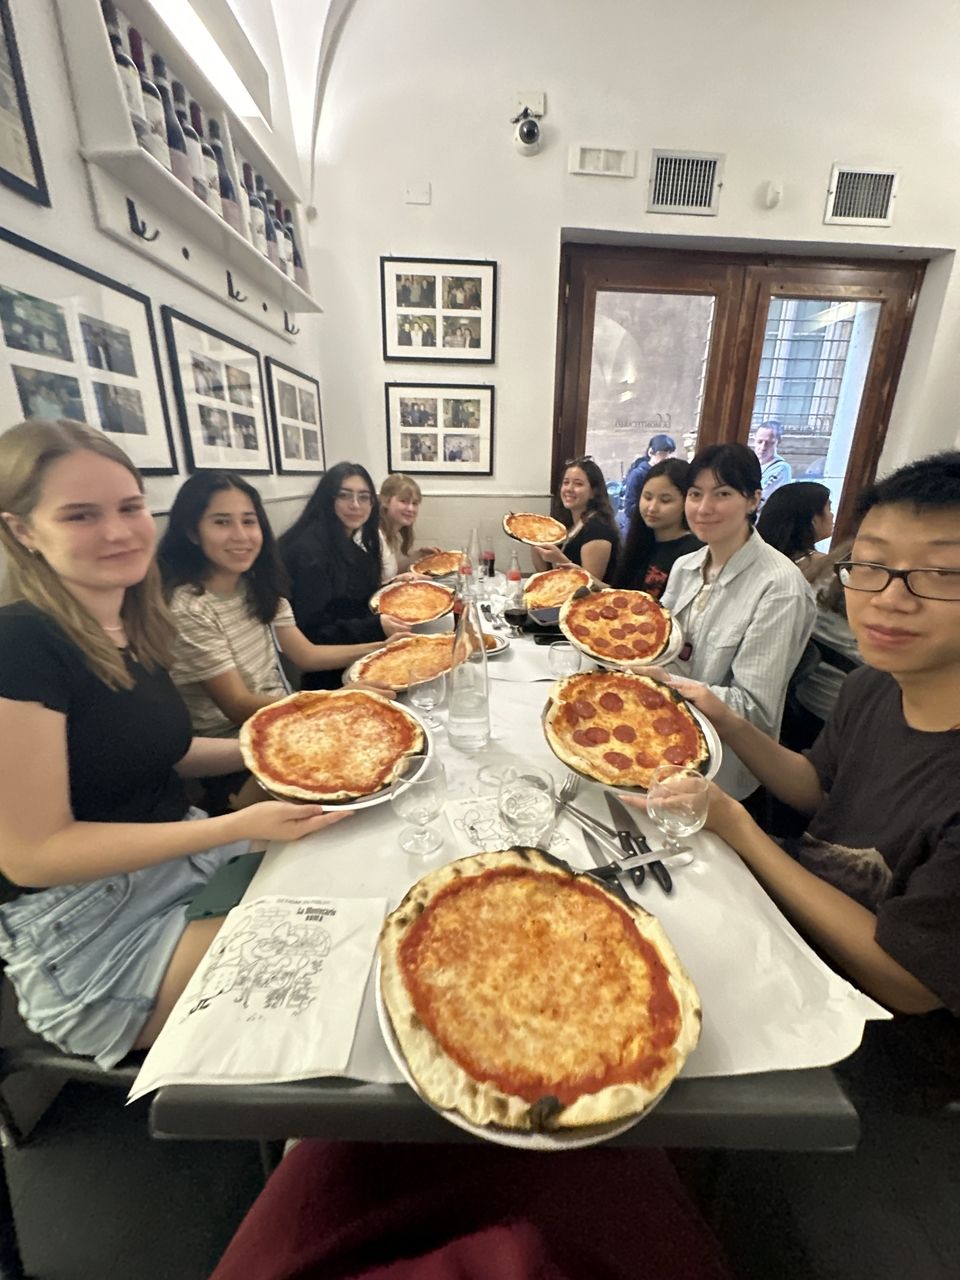 Students trying Italian pizza for the first time!